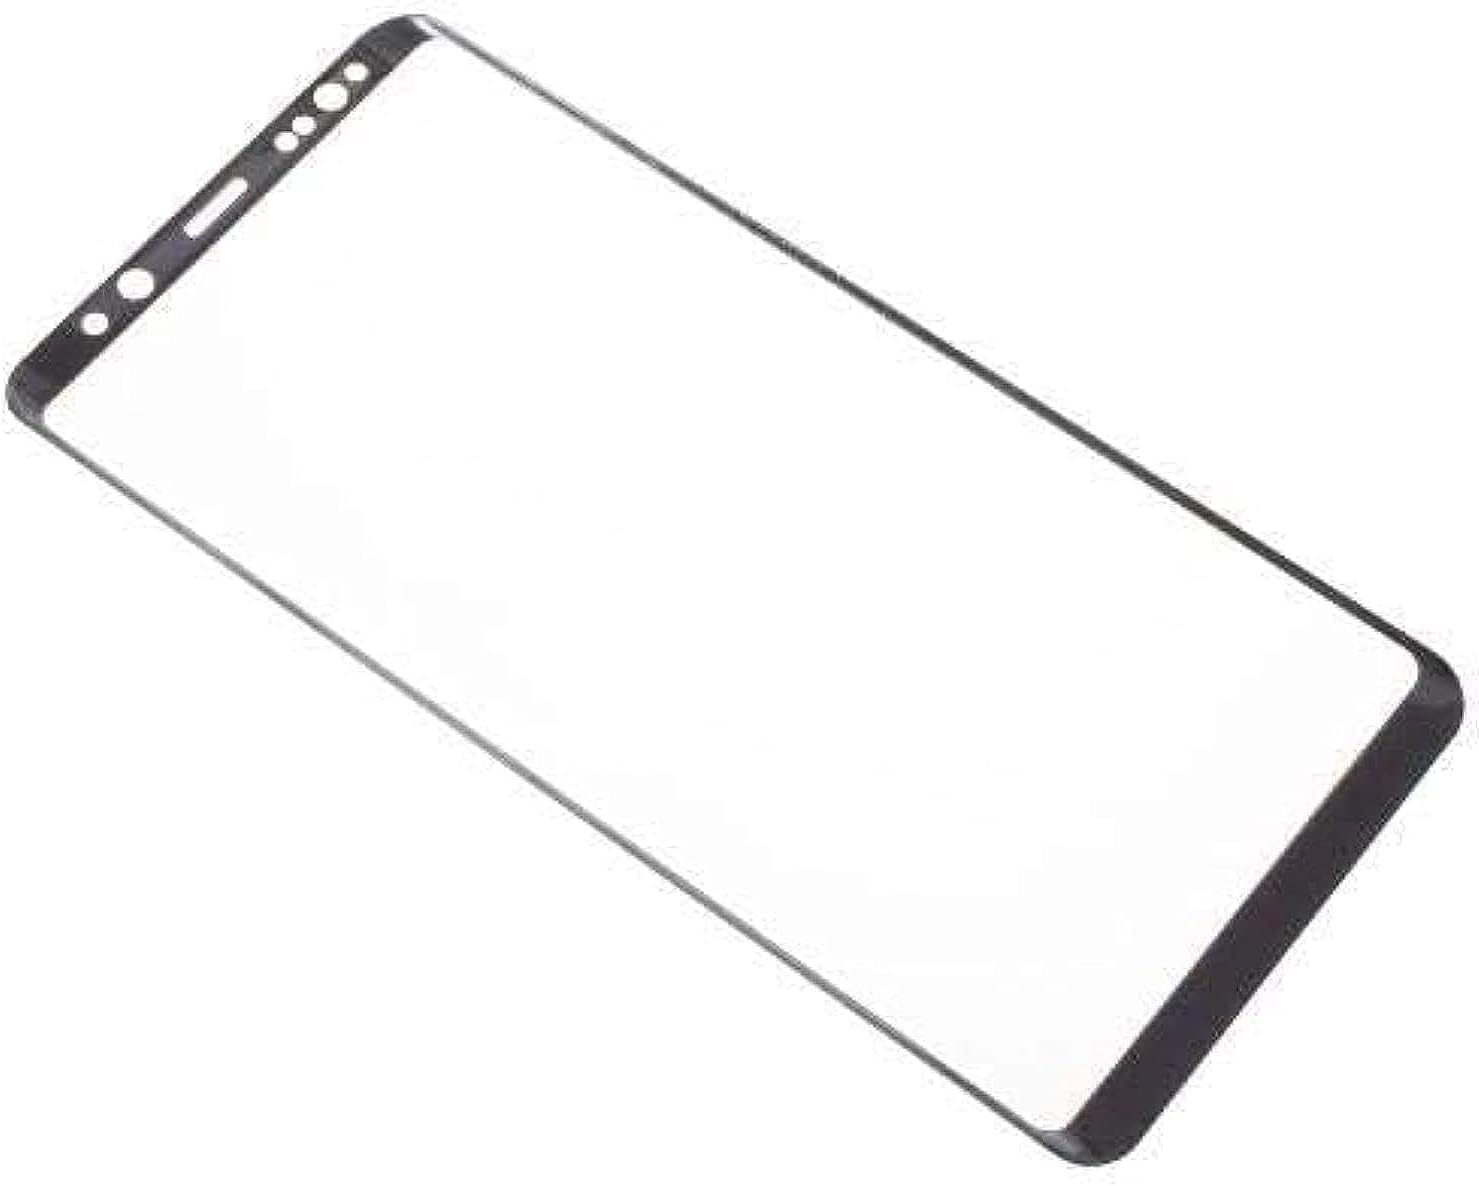 Tempered Glass Screen Protector for Samsung Galaxy Note 8 - Transparent with Black Frame